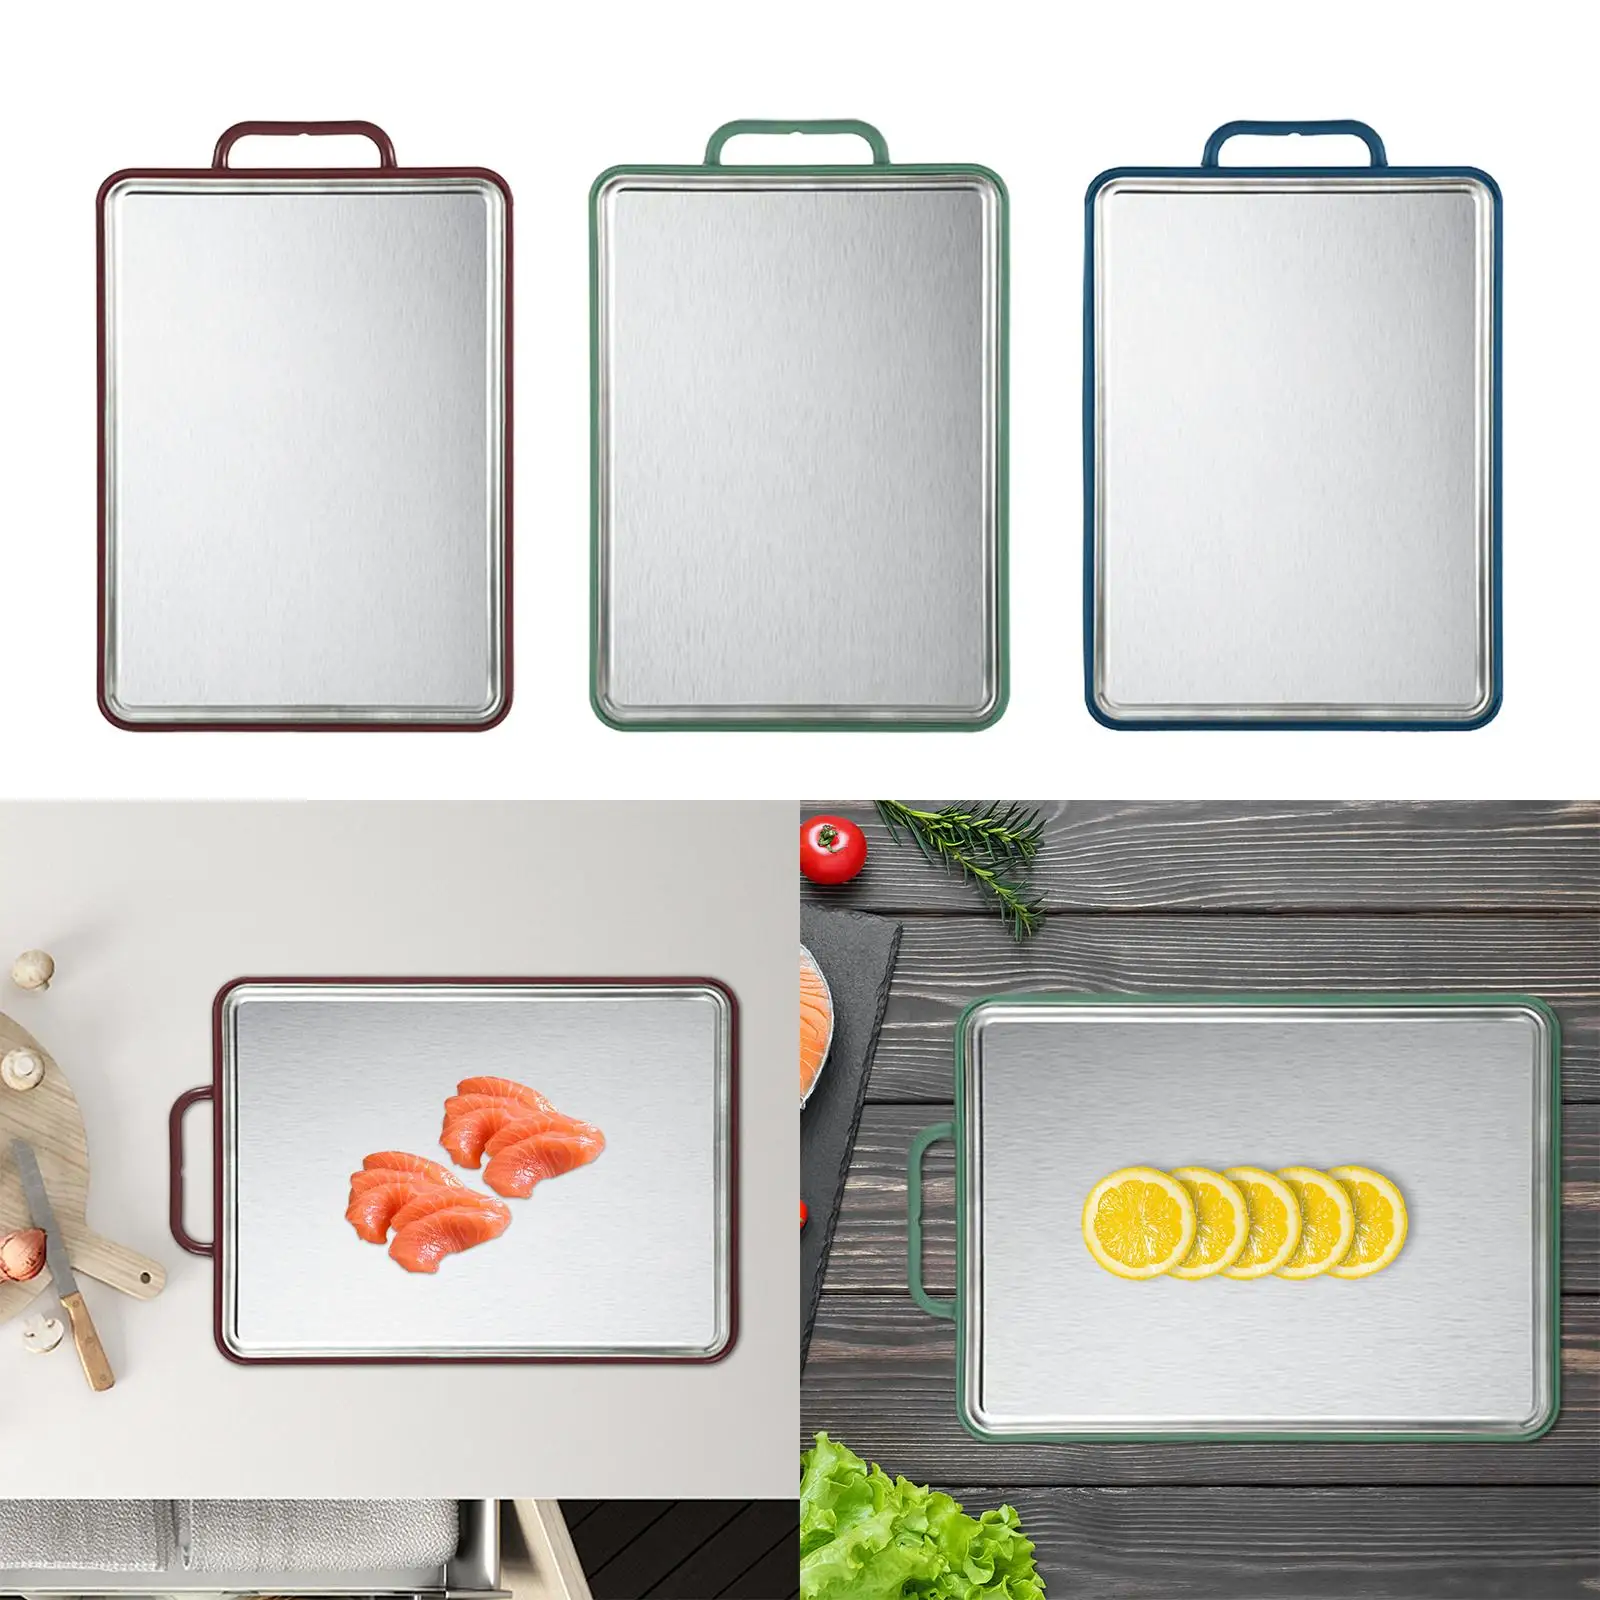 Double Sided Cutting Board Chopping Board Food Grade Material Kitchen Gadget